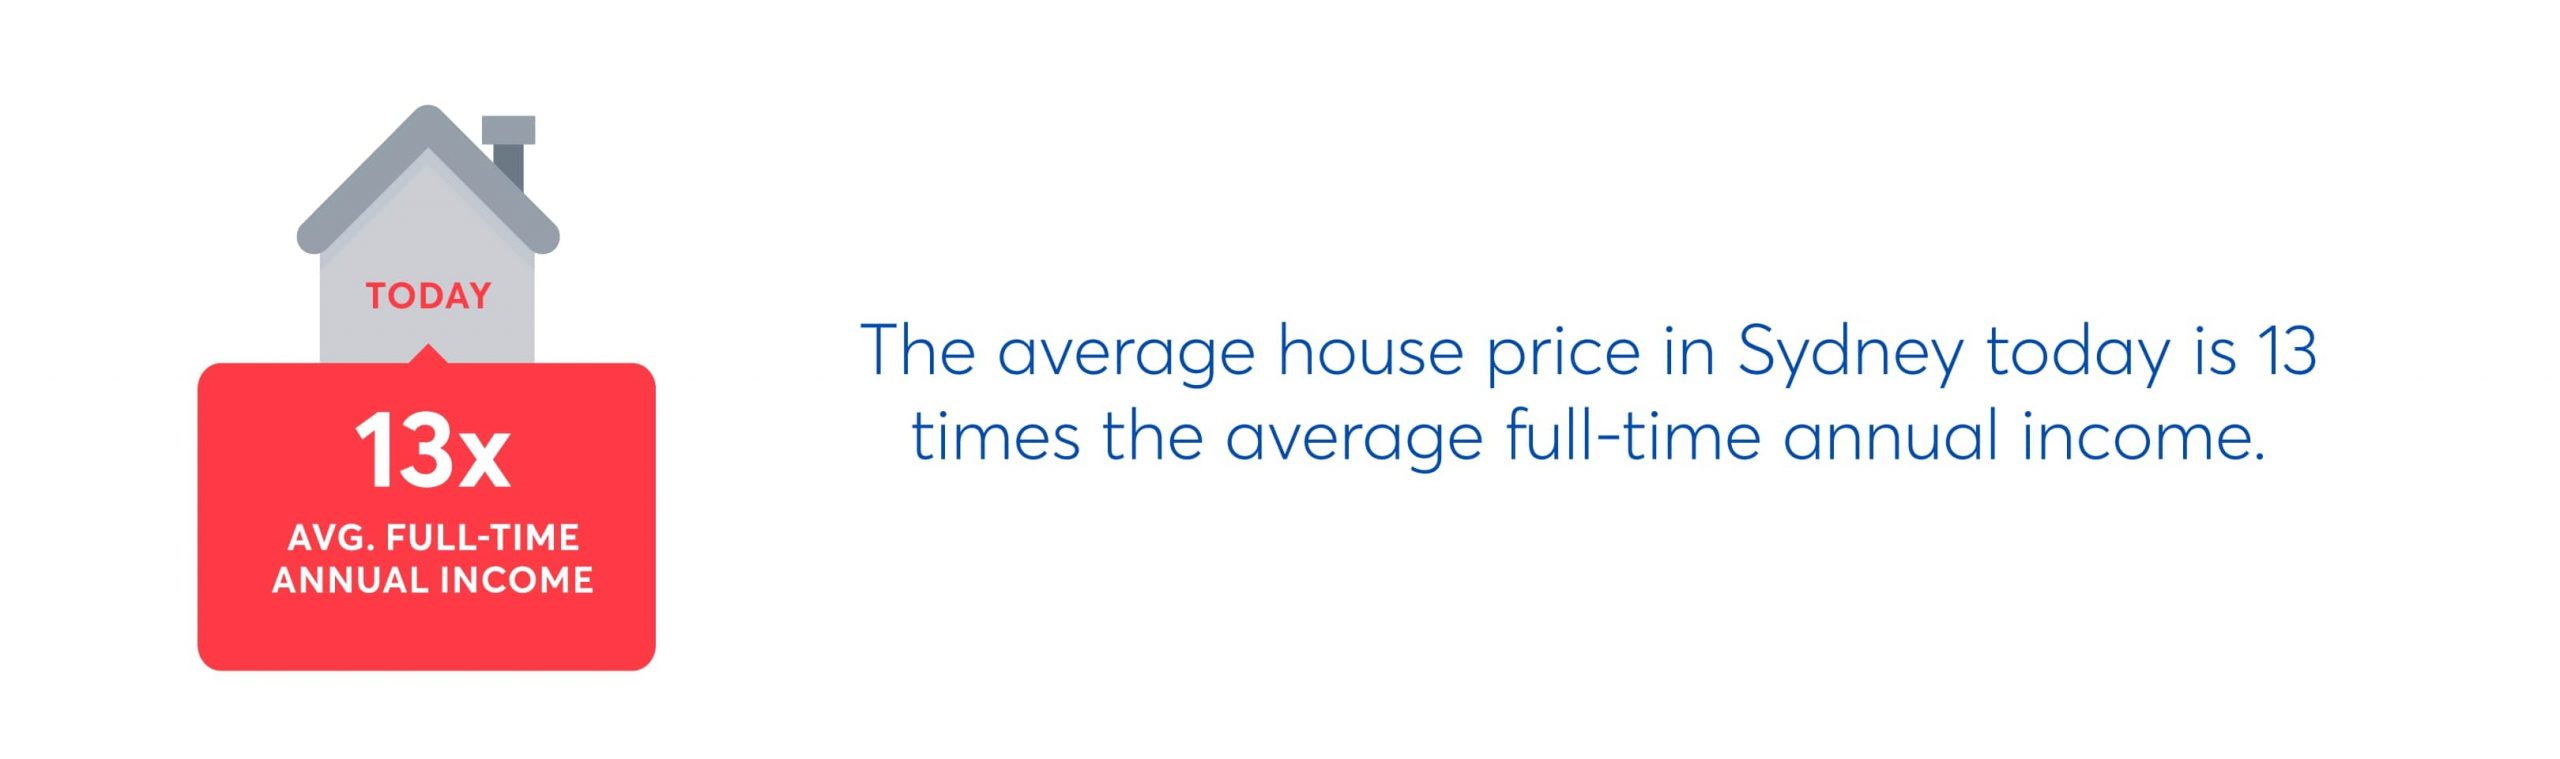 the average house price in sydney today is 13 times the average full time annual income